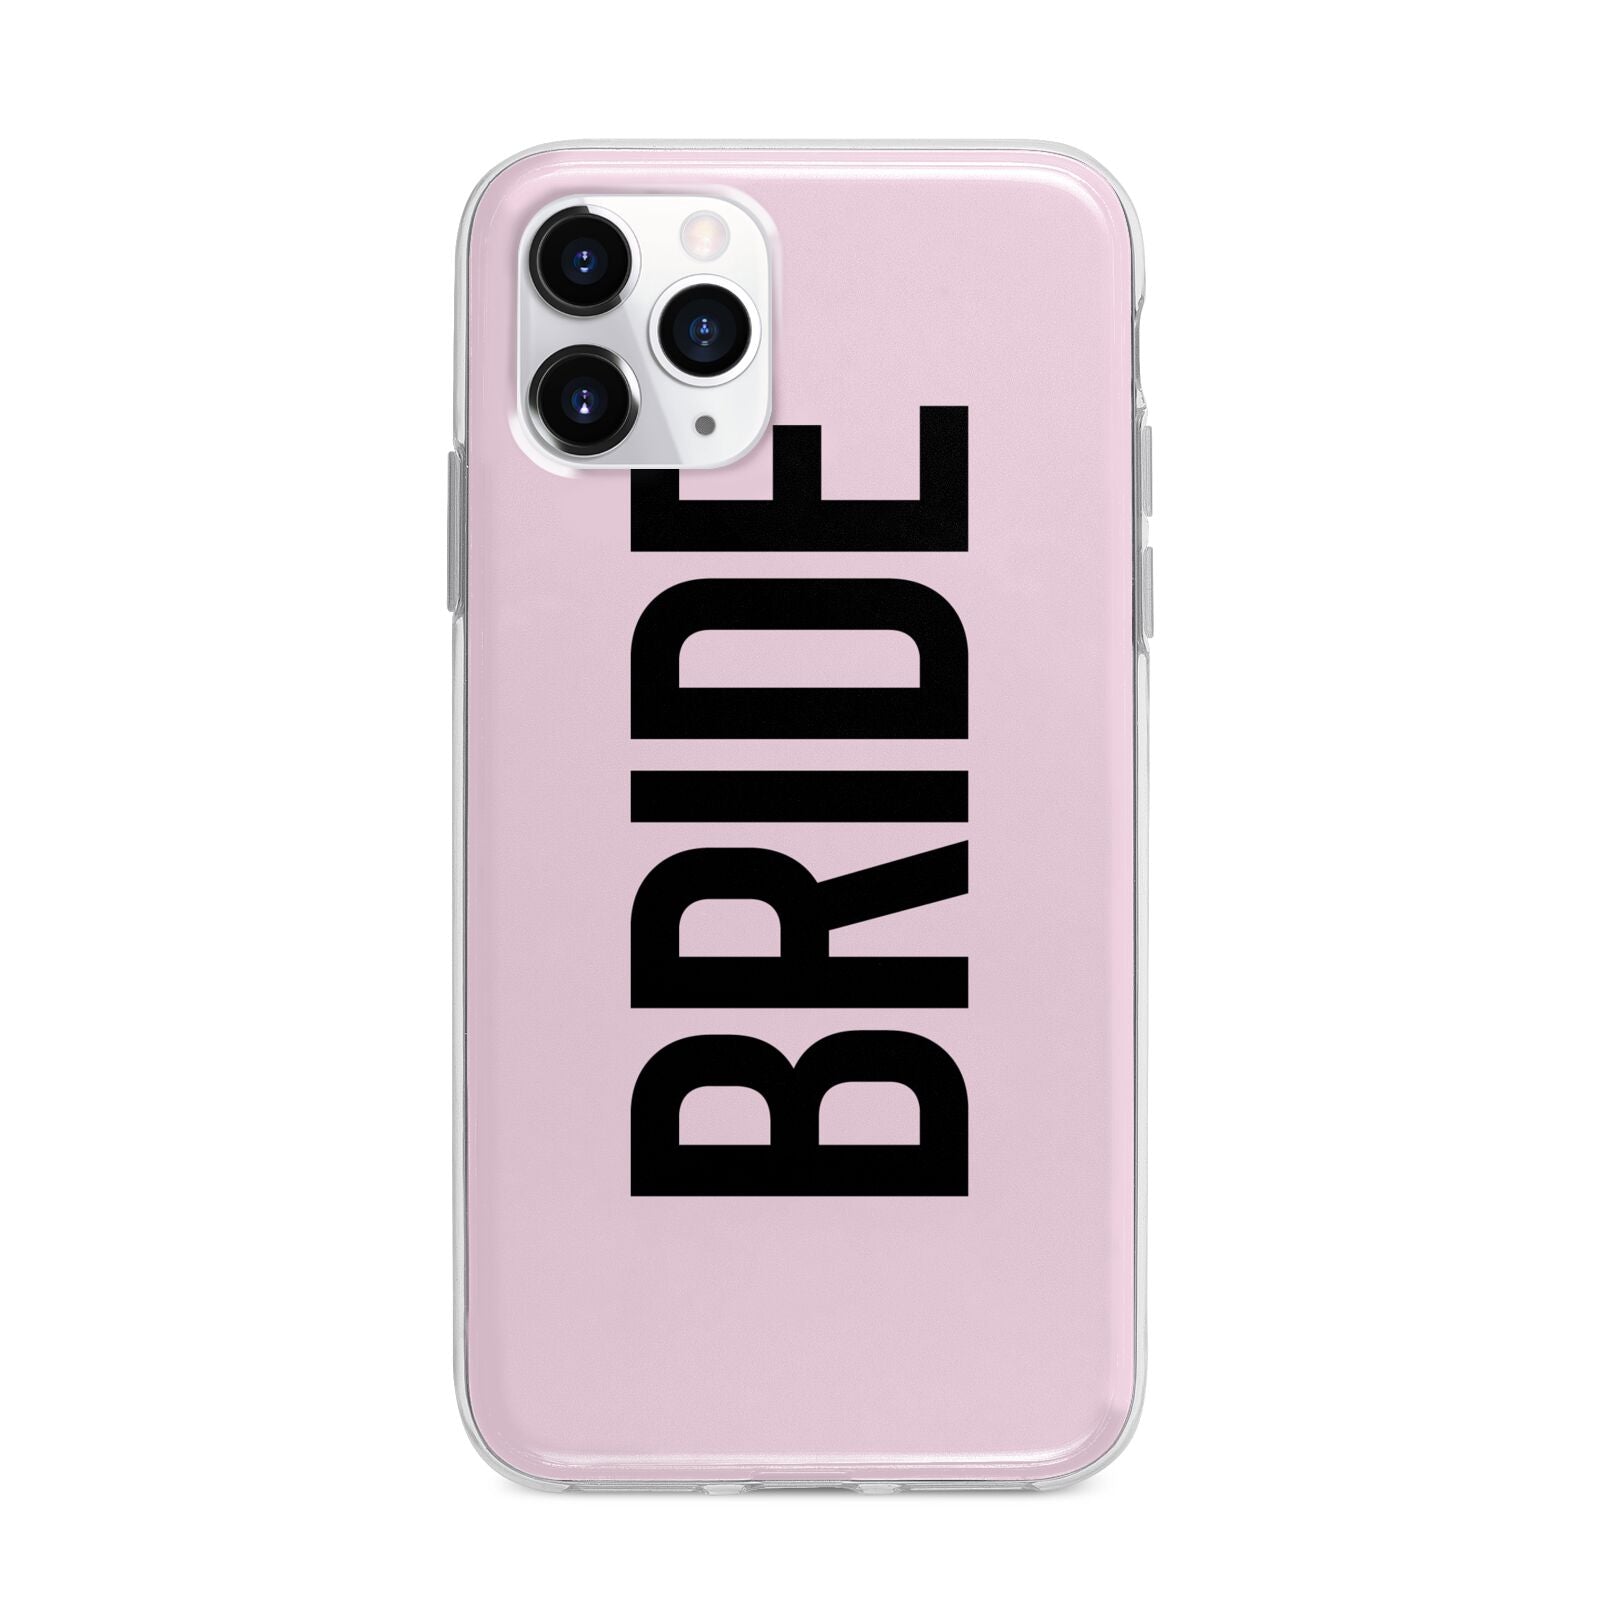 Bride Apple iPhone 11 Pro Max in Silver with Bumper Case